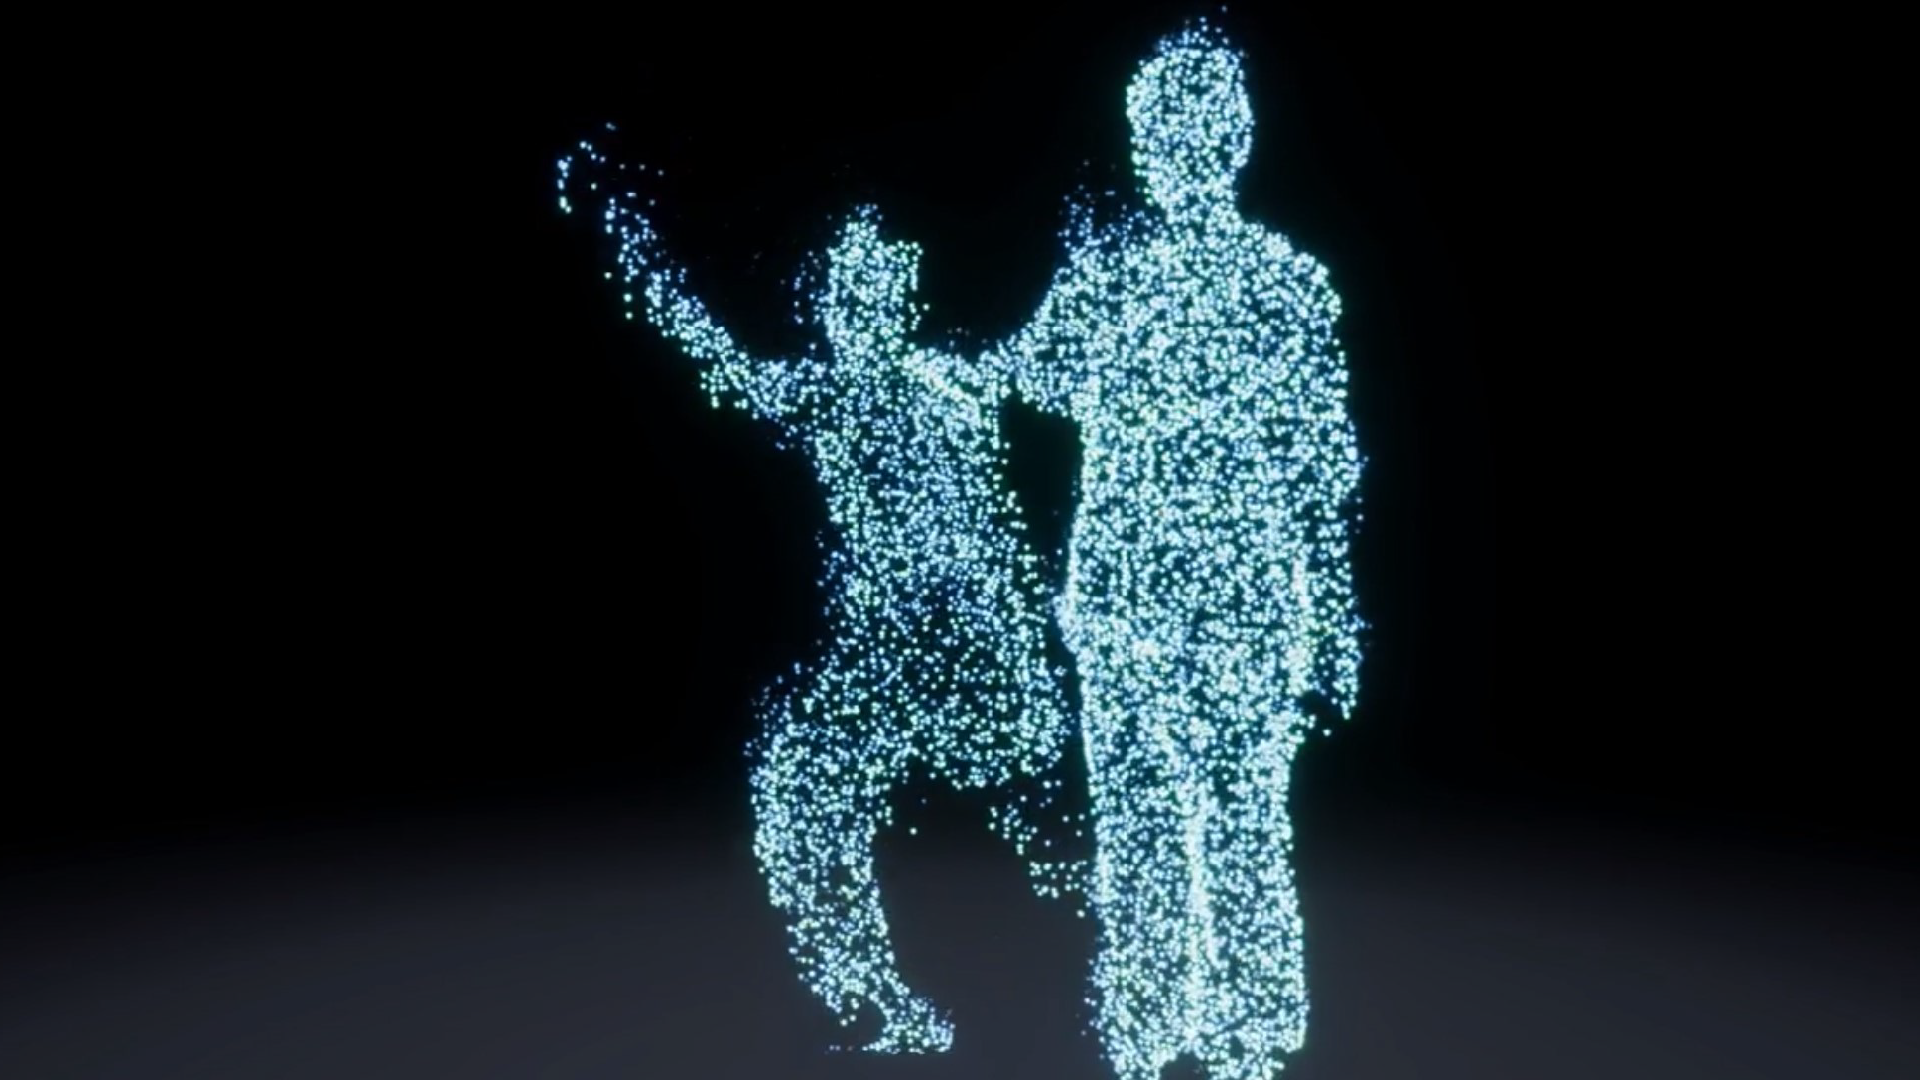 An Adobe Innovation Grant has been awarded to support the exploration of volumetric capture technology of virtual performances by NICA. it is the outline of two dancing figures created by an array of glowing blue dots